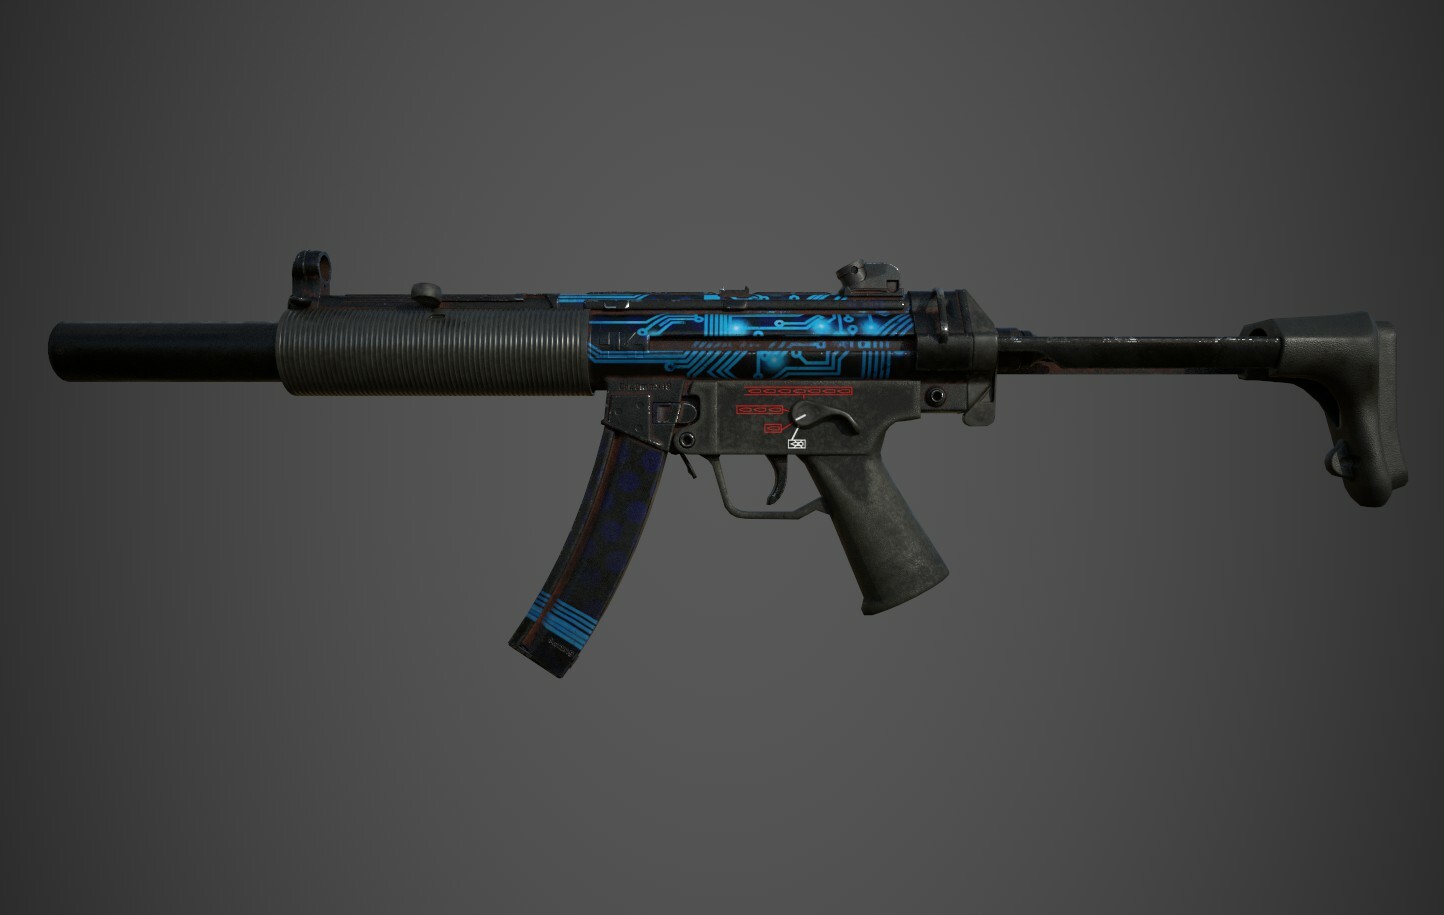 MP5-SD  Condition Zero (Field Tested-0.18) Skin Showcase from new